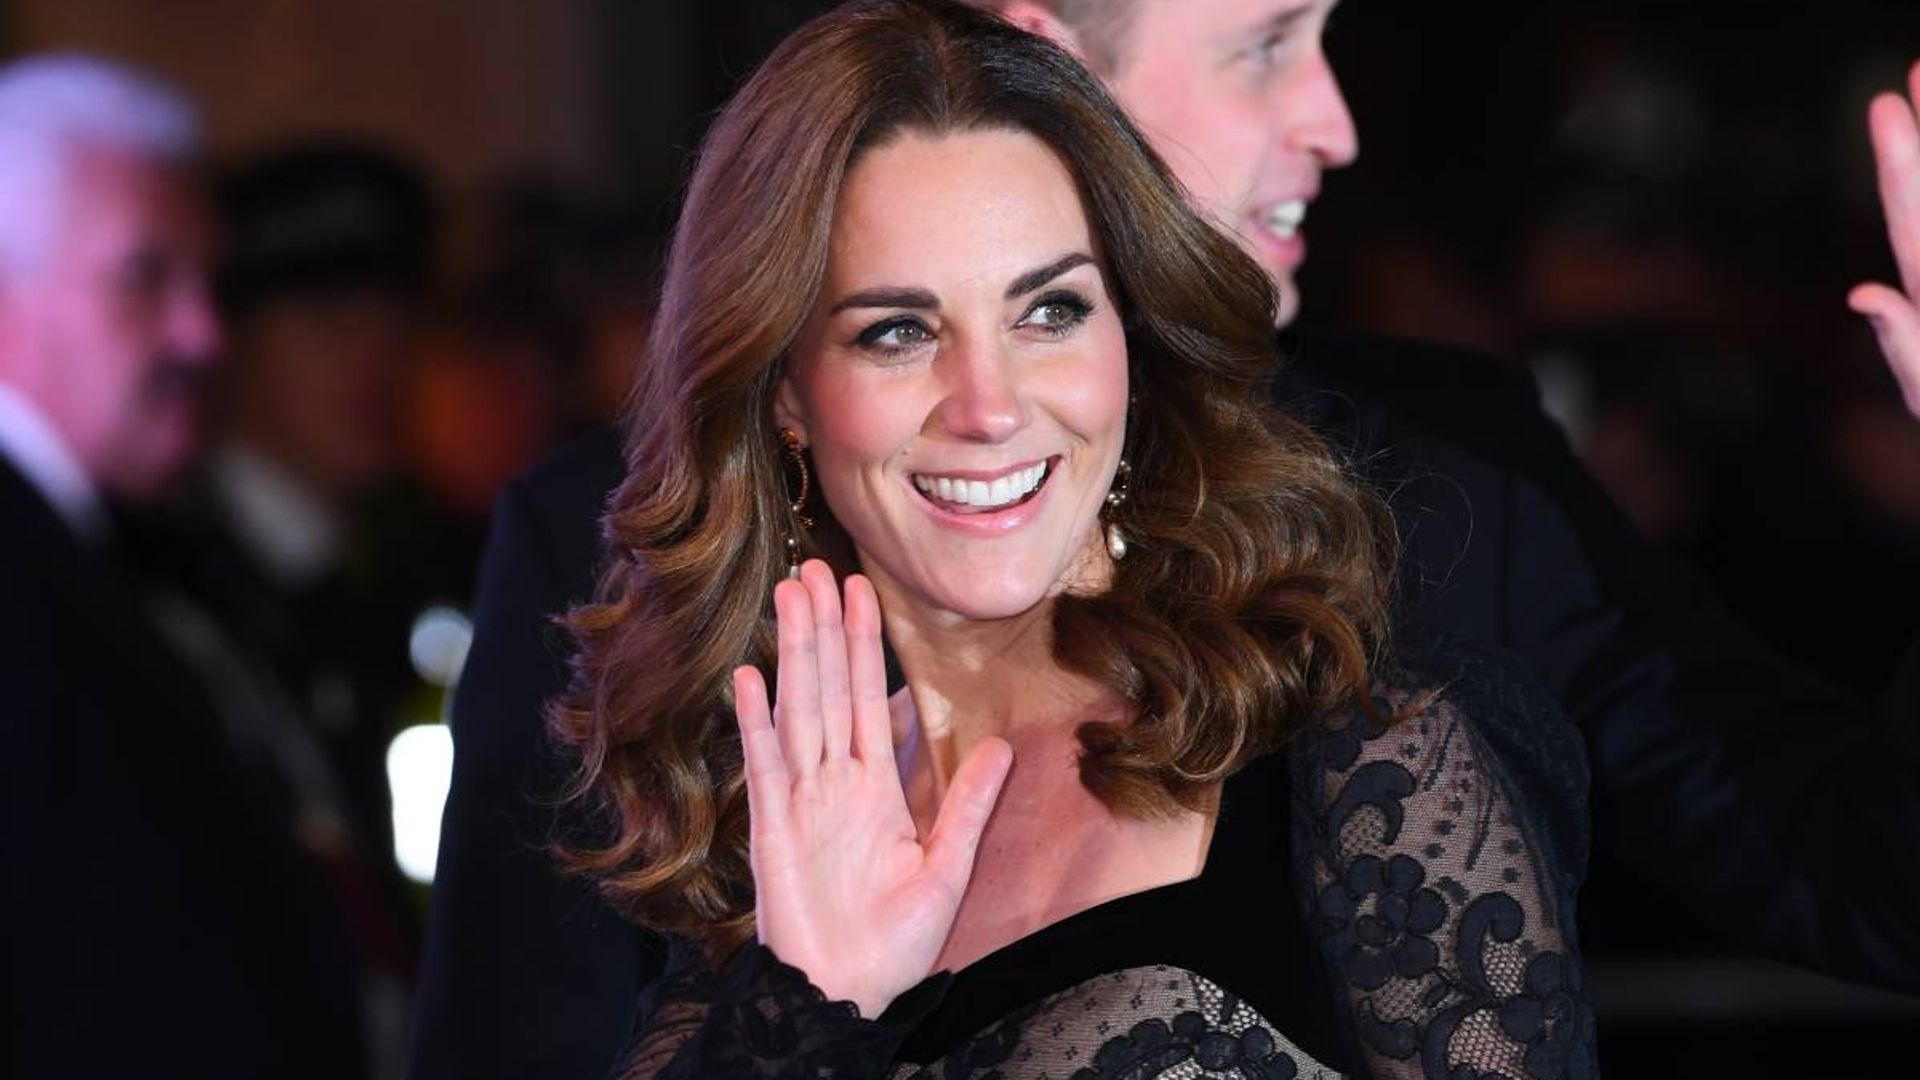 The Duchess of Cambridge dazzles in sheer black lace gown at the Royal Variety Performance